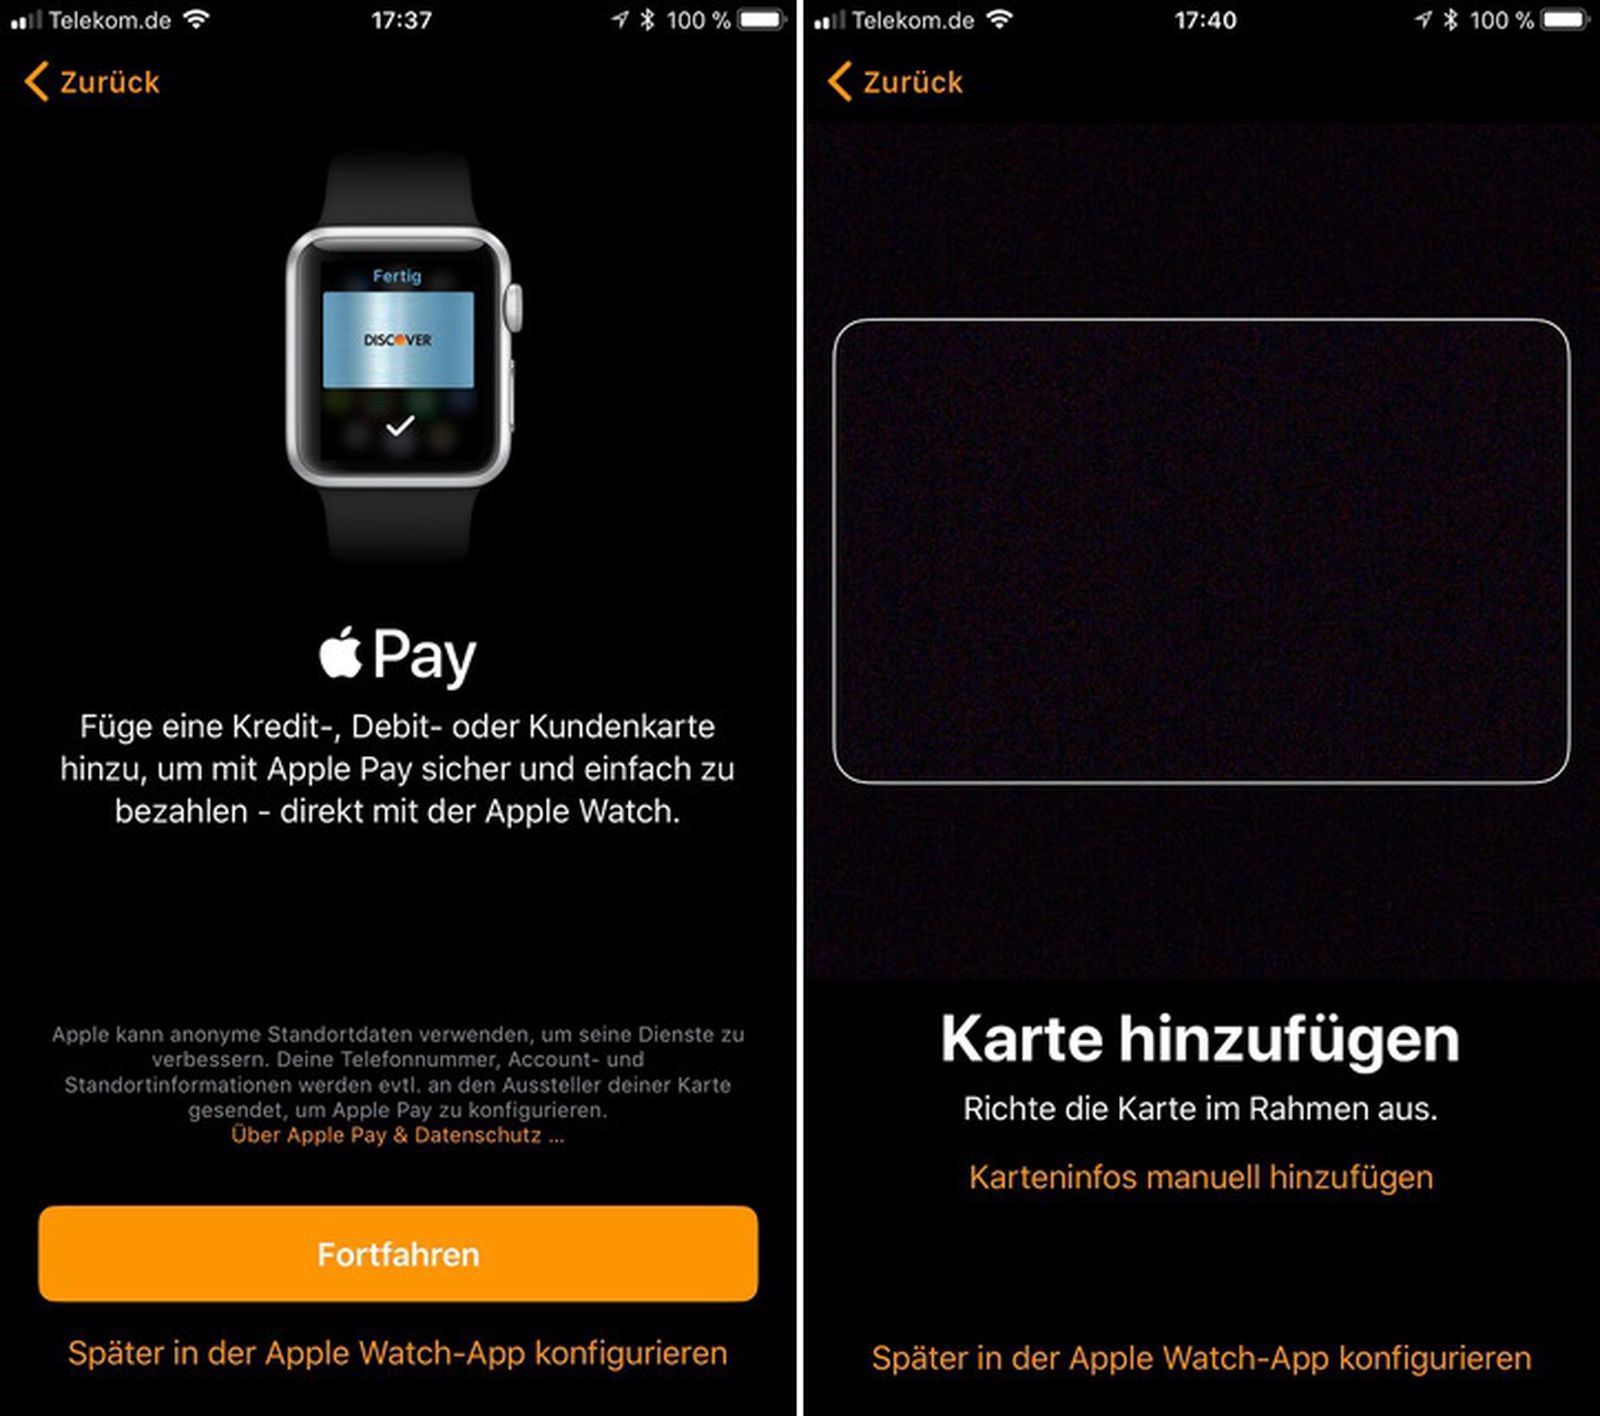 Apple Pay Could Launch in Germany as Early as Next Month - MacRumors